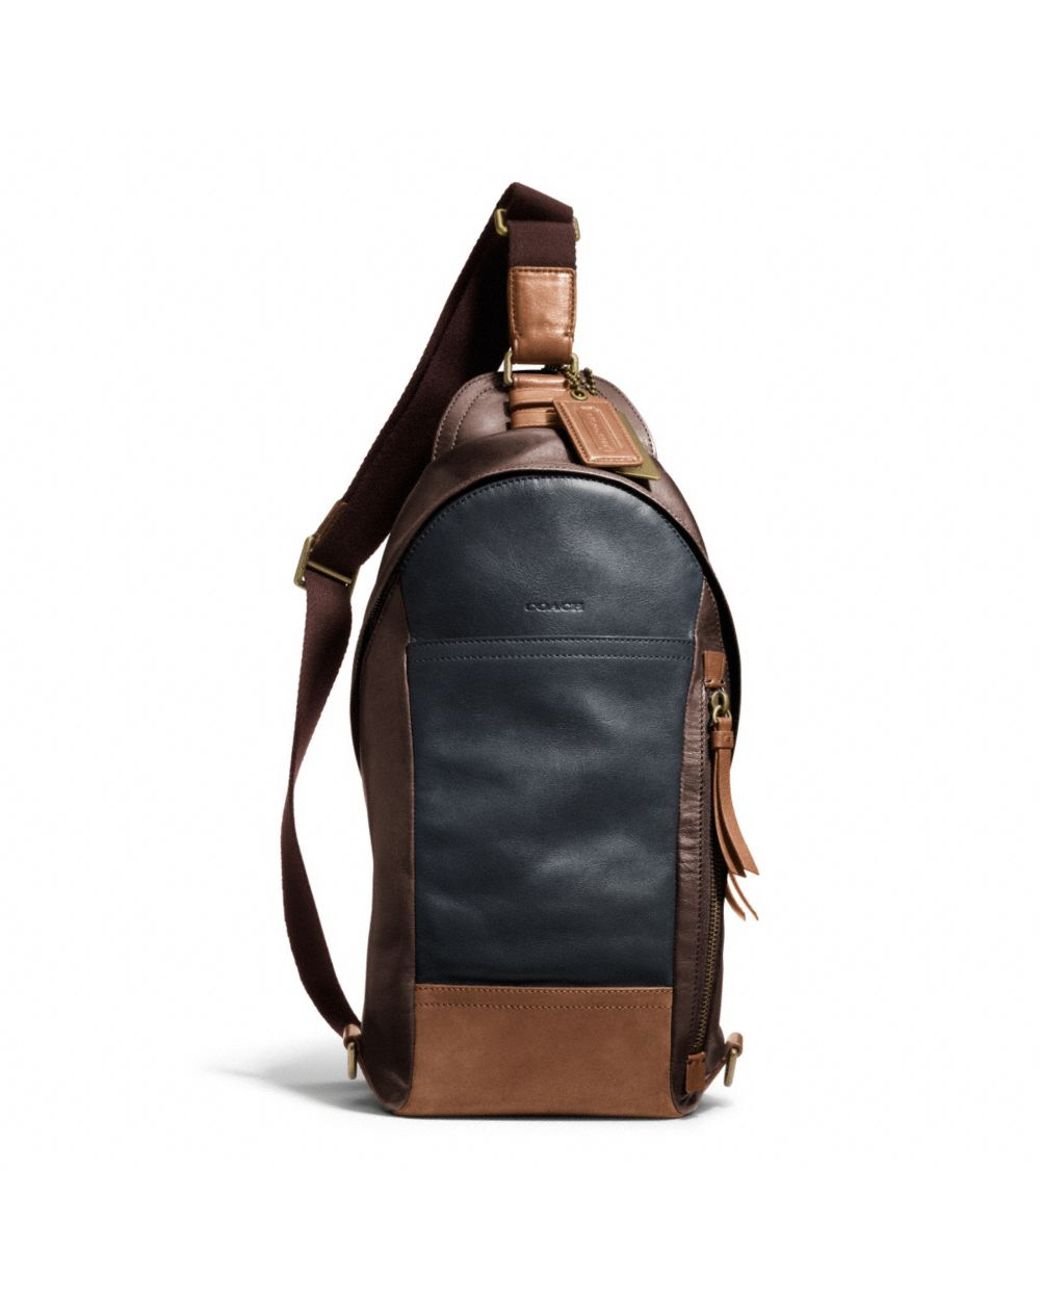 COACH Bleecker Convertible Sling Pack in Colorblock Leather in